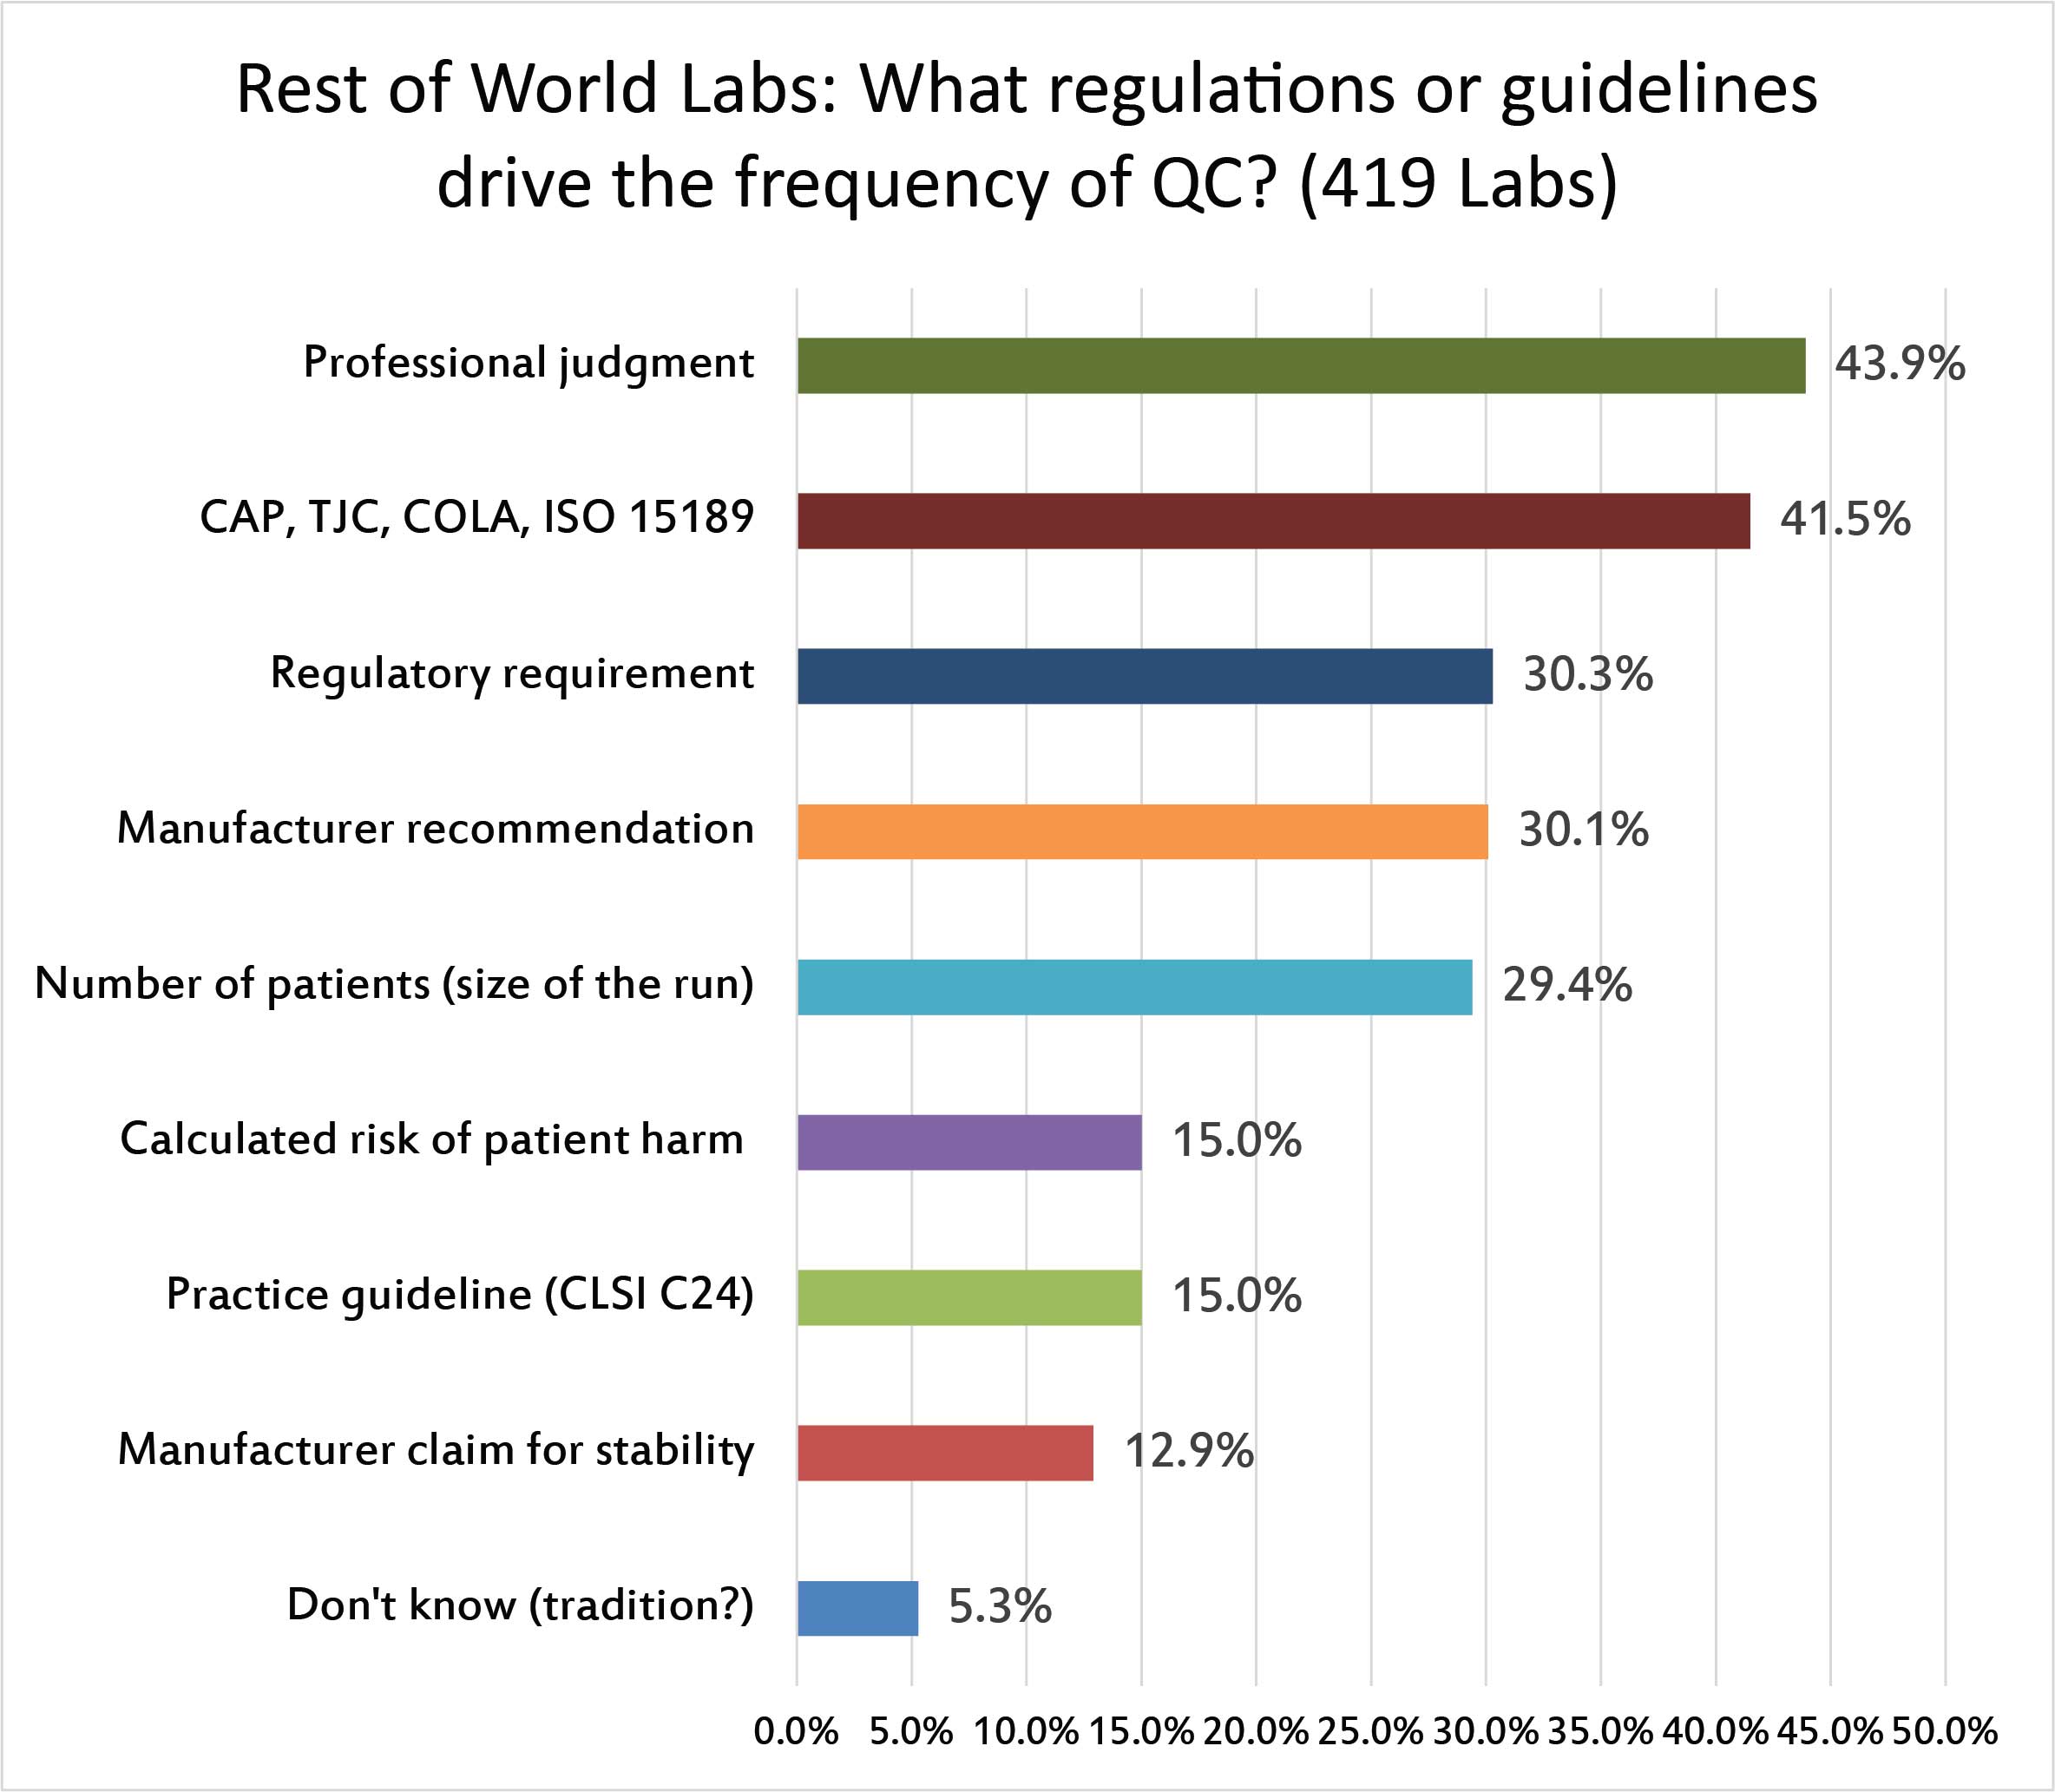 2017 Global QC Survey rest of world: what informs the QC frequency